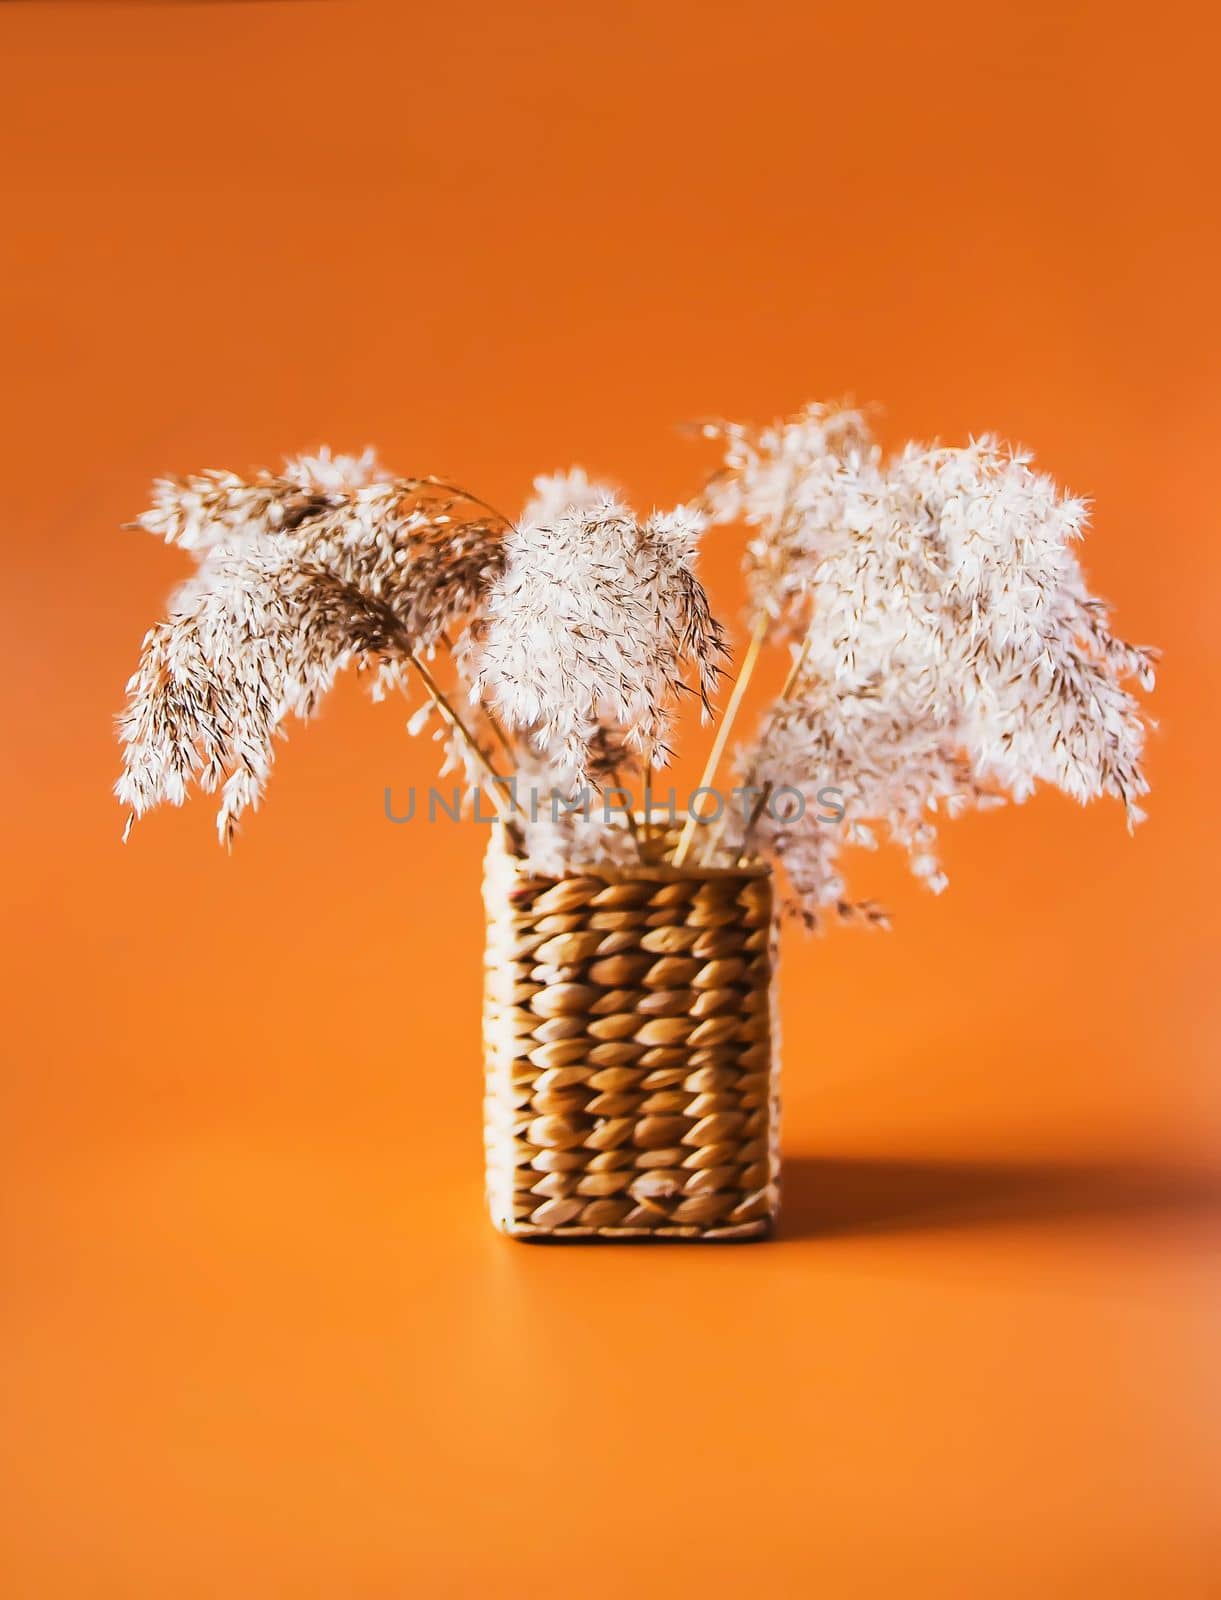 Dry plants in a vase. Interior decor. by nightlyviolet